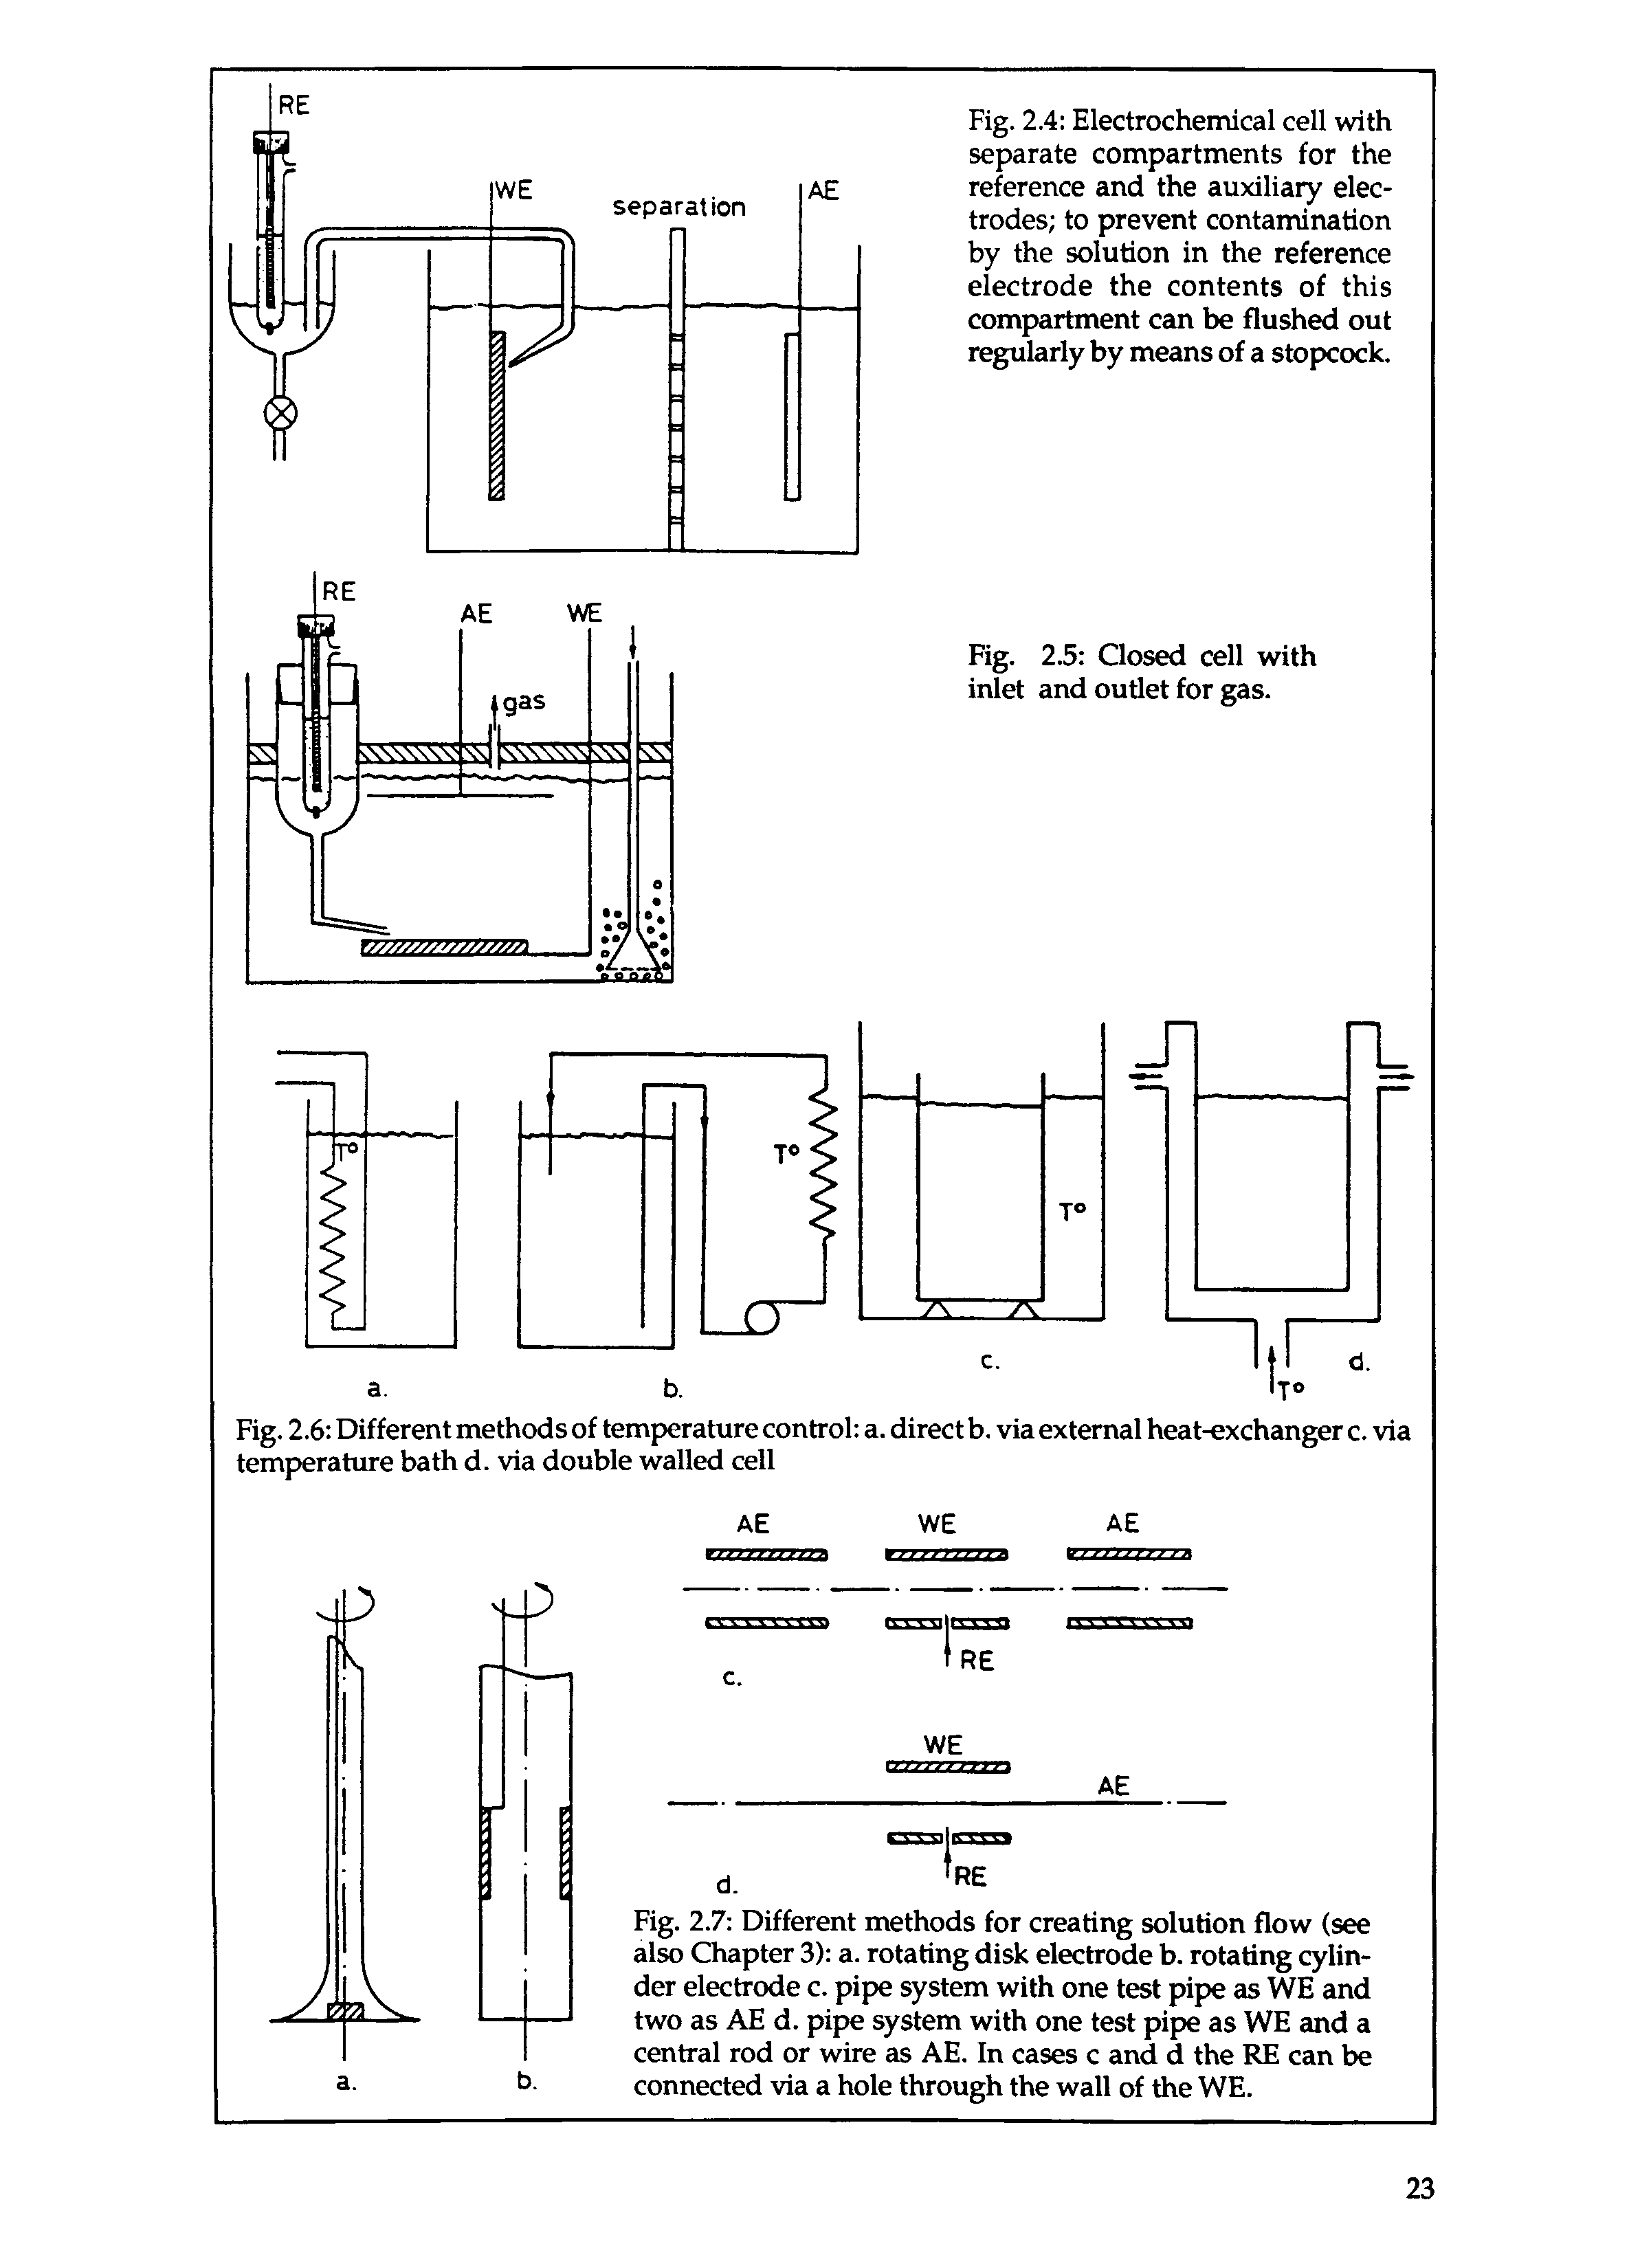 Fig. 2.7 Different methods for creating solution flow (see also Chapter 3) a. rotating disk electrode b. rotating cylinder electrode c. pipe stem with one test pipe as WE and two as AE d. pipe stem with one test pipe as WE and a central rod or wire as AE. In cases c and d the RE can be connected via a hole through the wall of the WE.